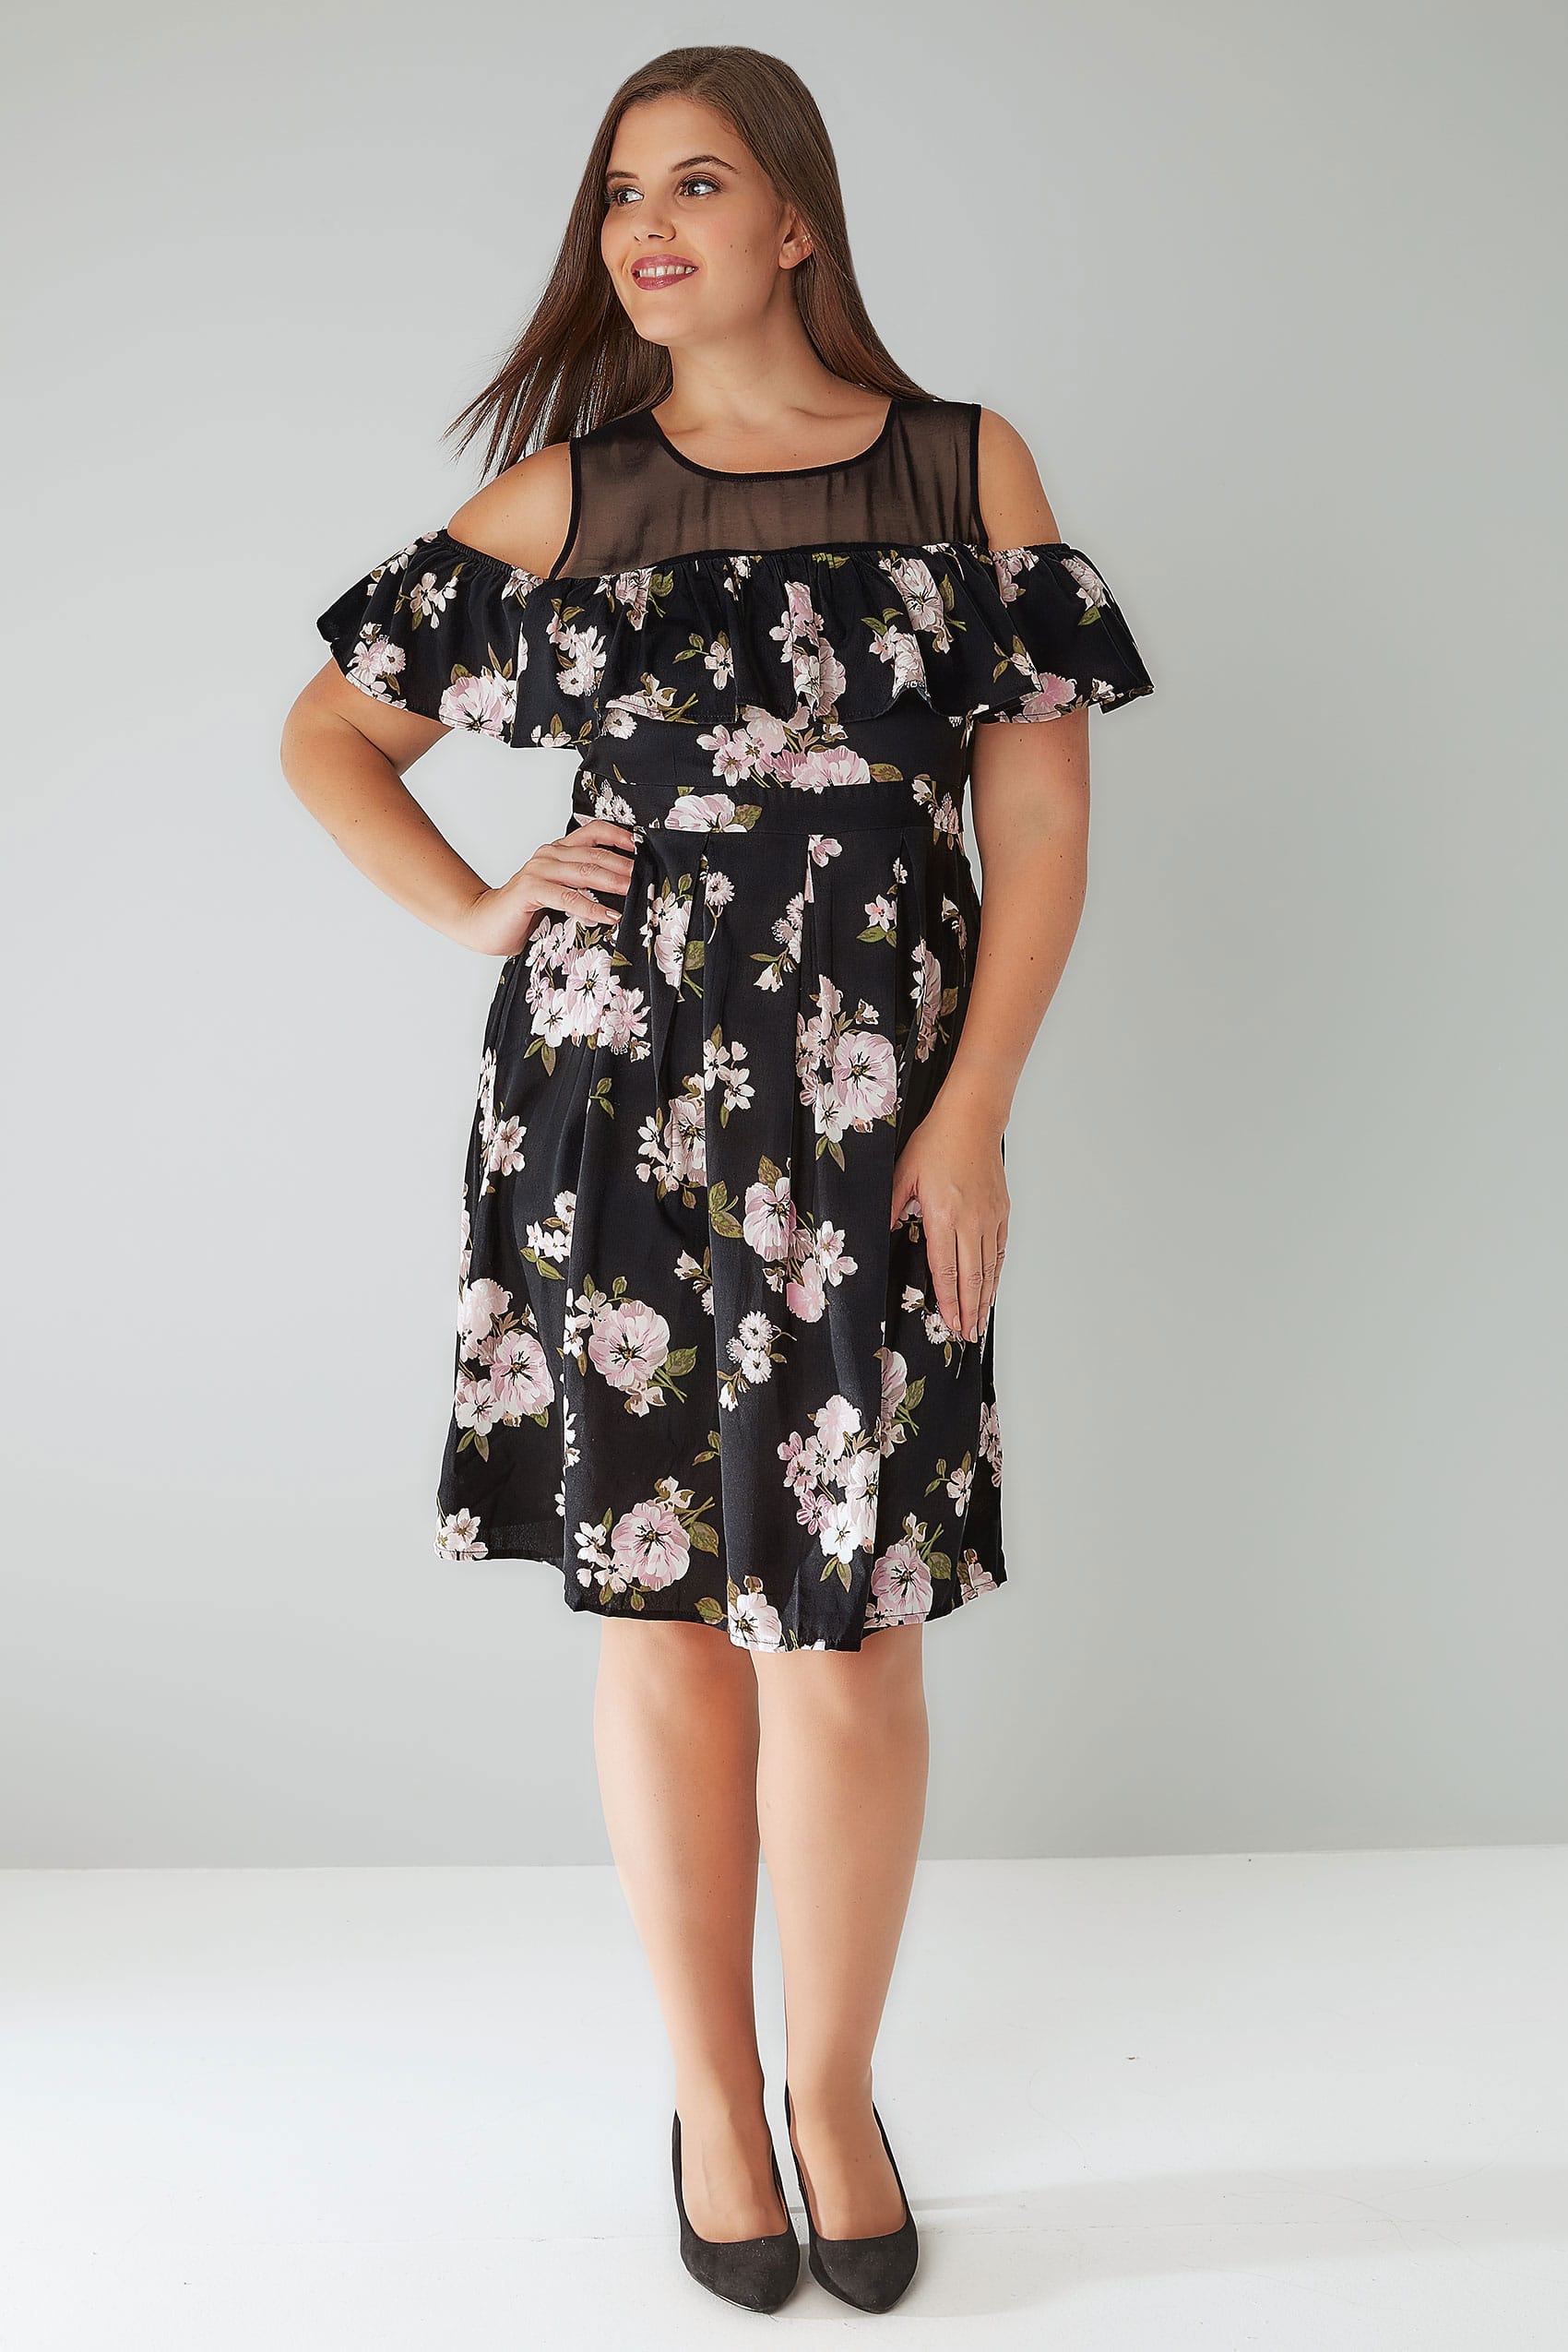 Black And Pink Floral Frill Cold Shoulder Dress With